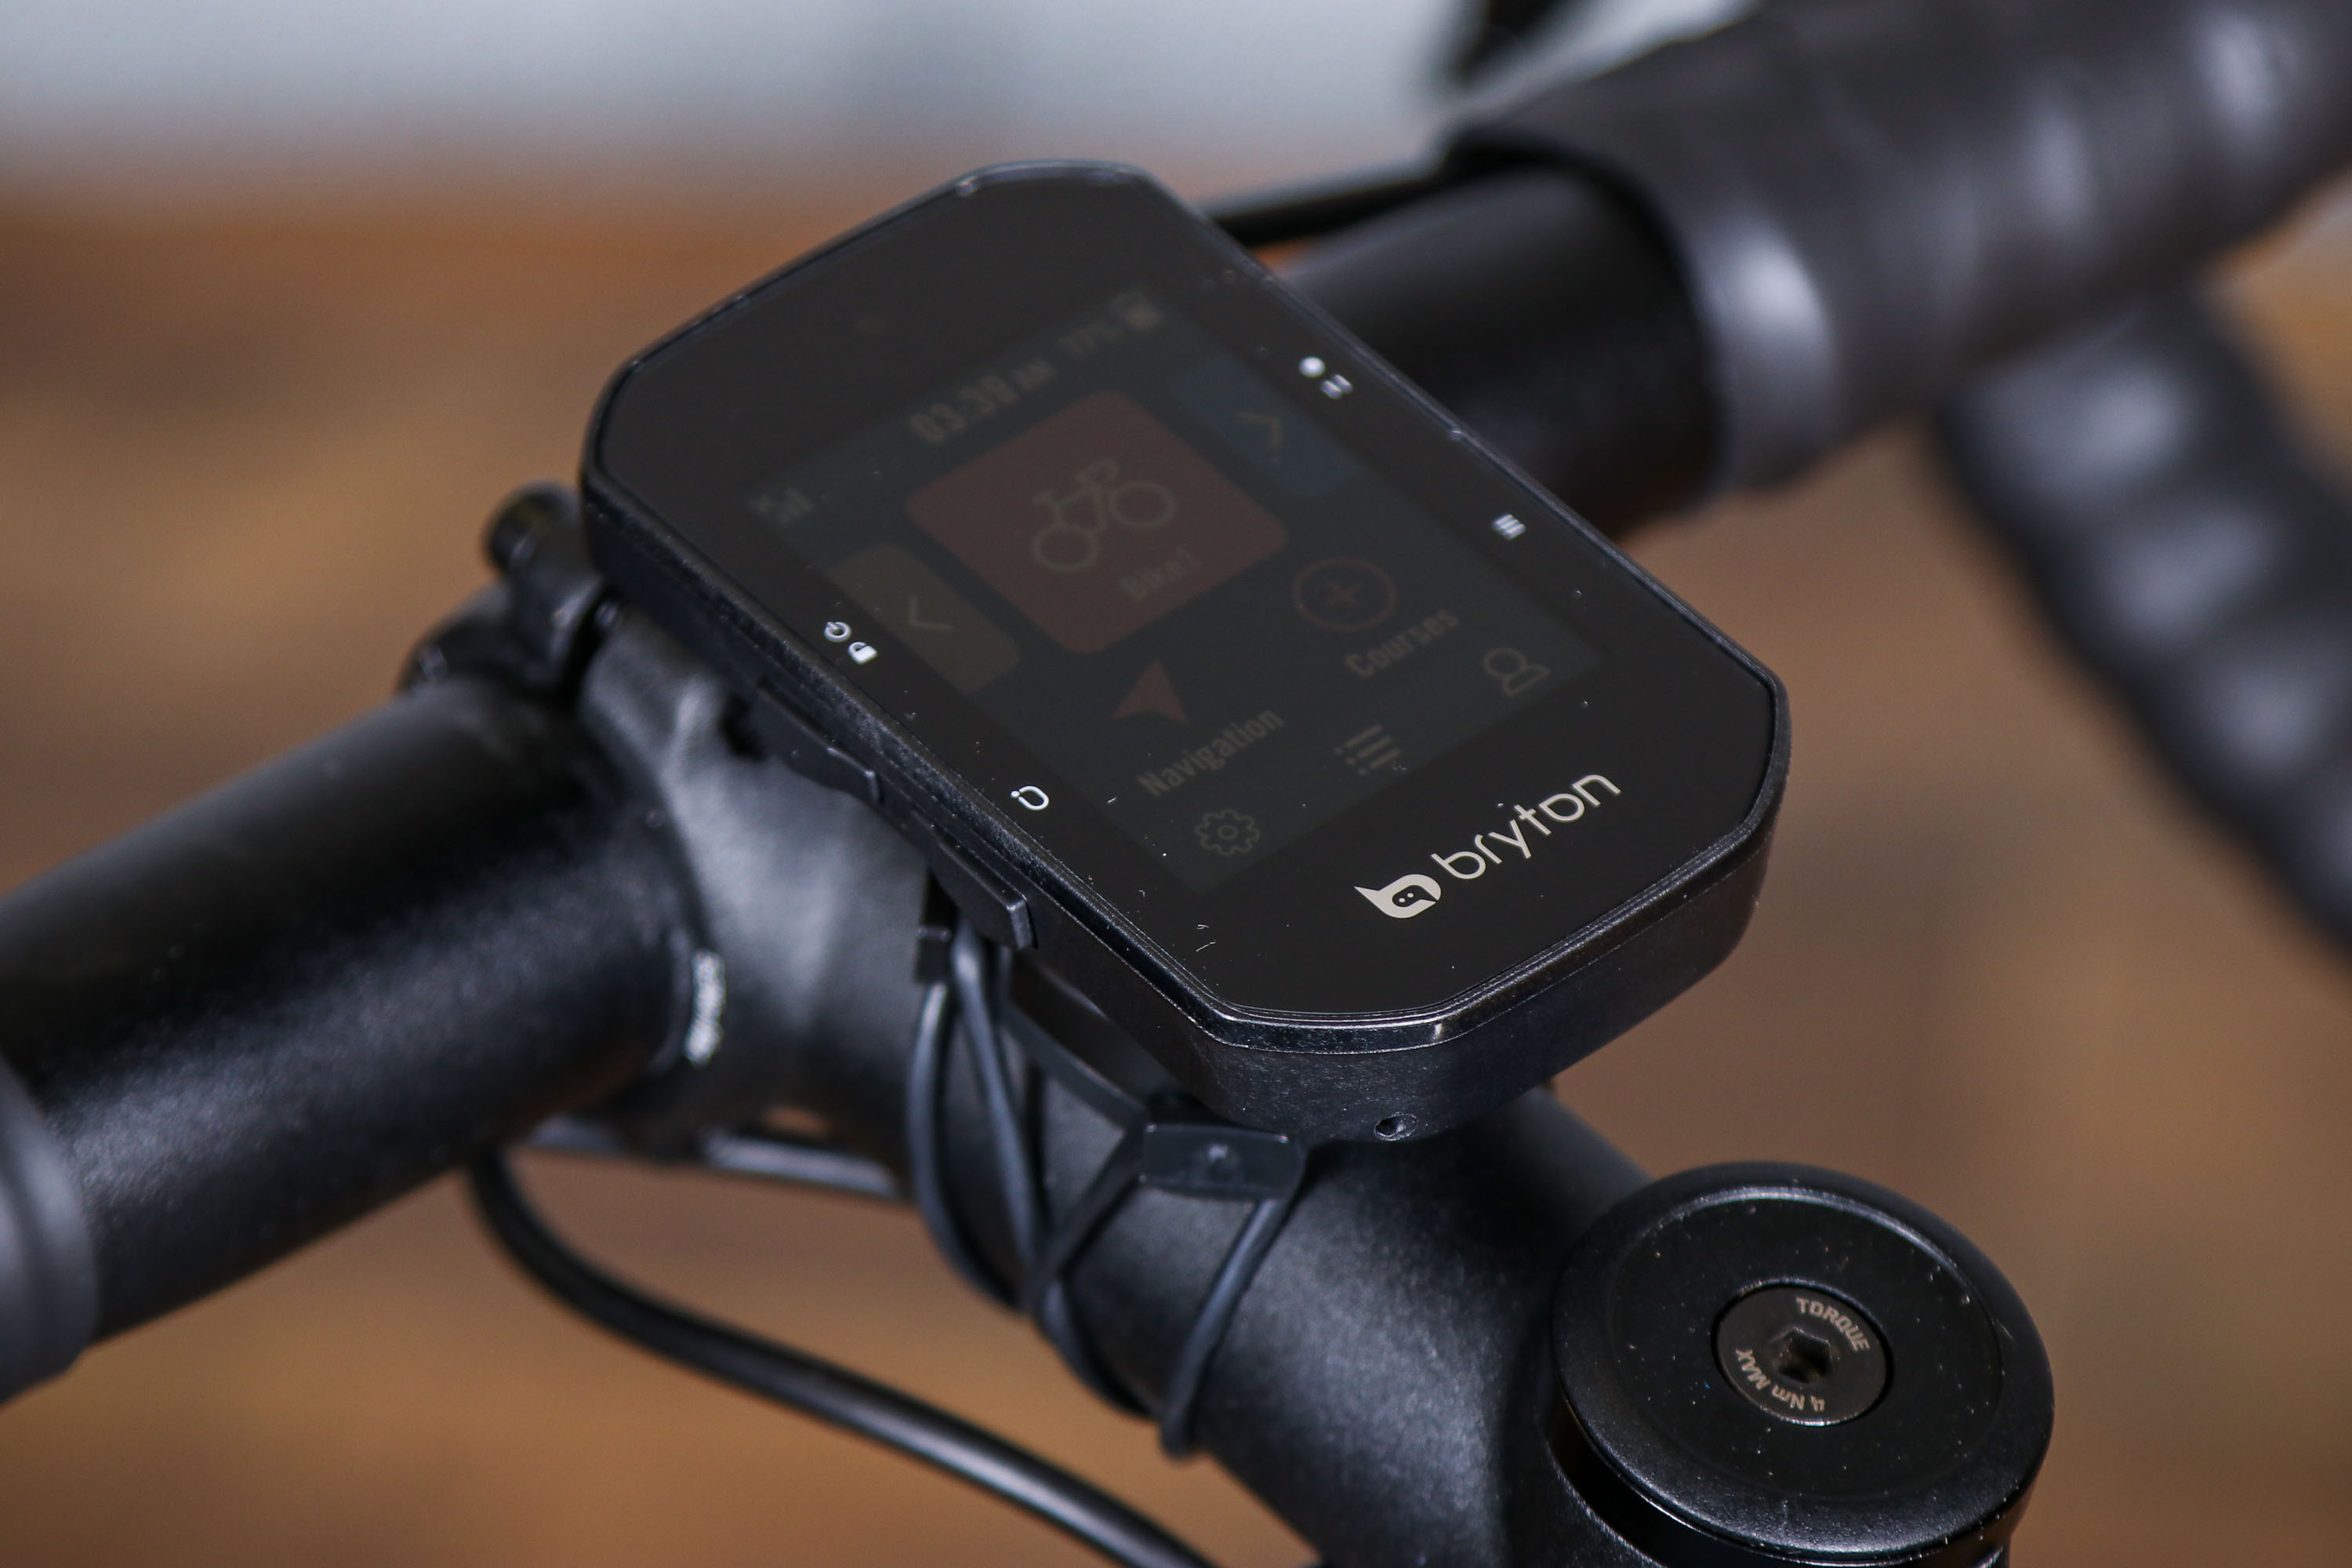 Review: Bryton S500E GPS Cycle Computer – 8/10 – solid performer 